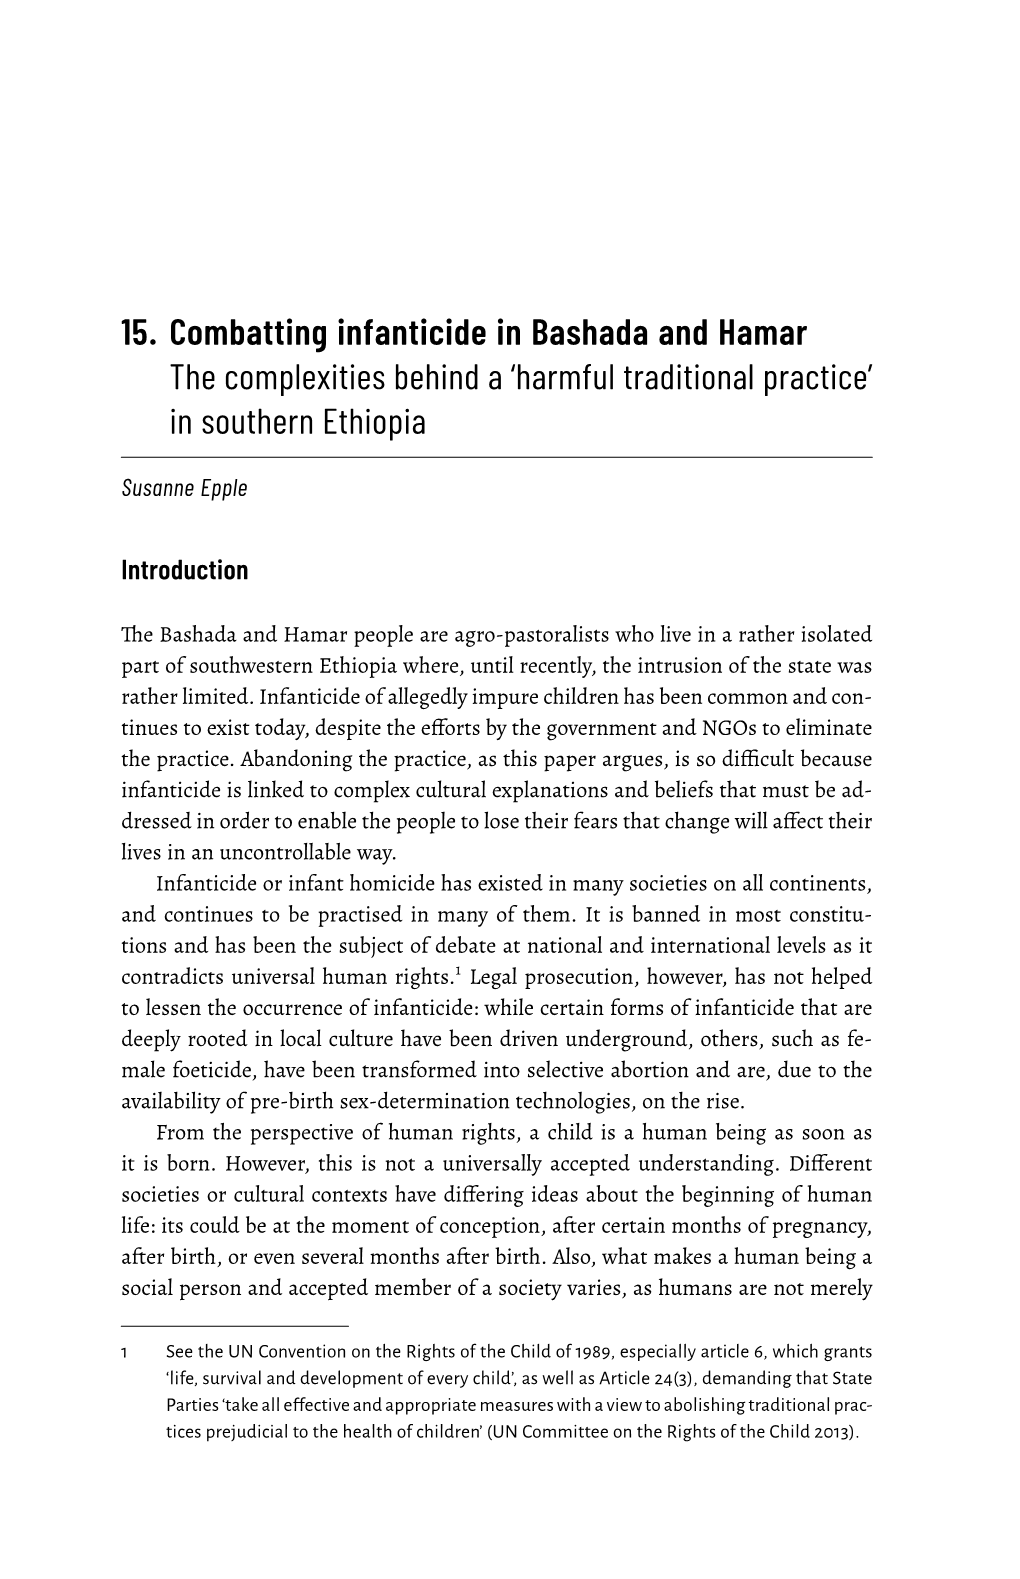 15. Combatting Infanticide in Bashada and Hamar the Complexities Behind a ‘Harmful Traditional Practice’ in Southern Ethiopia